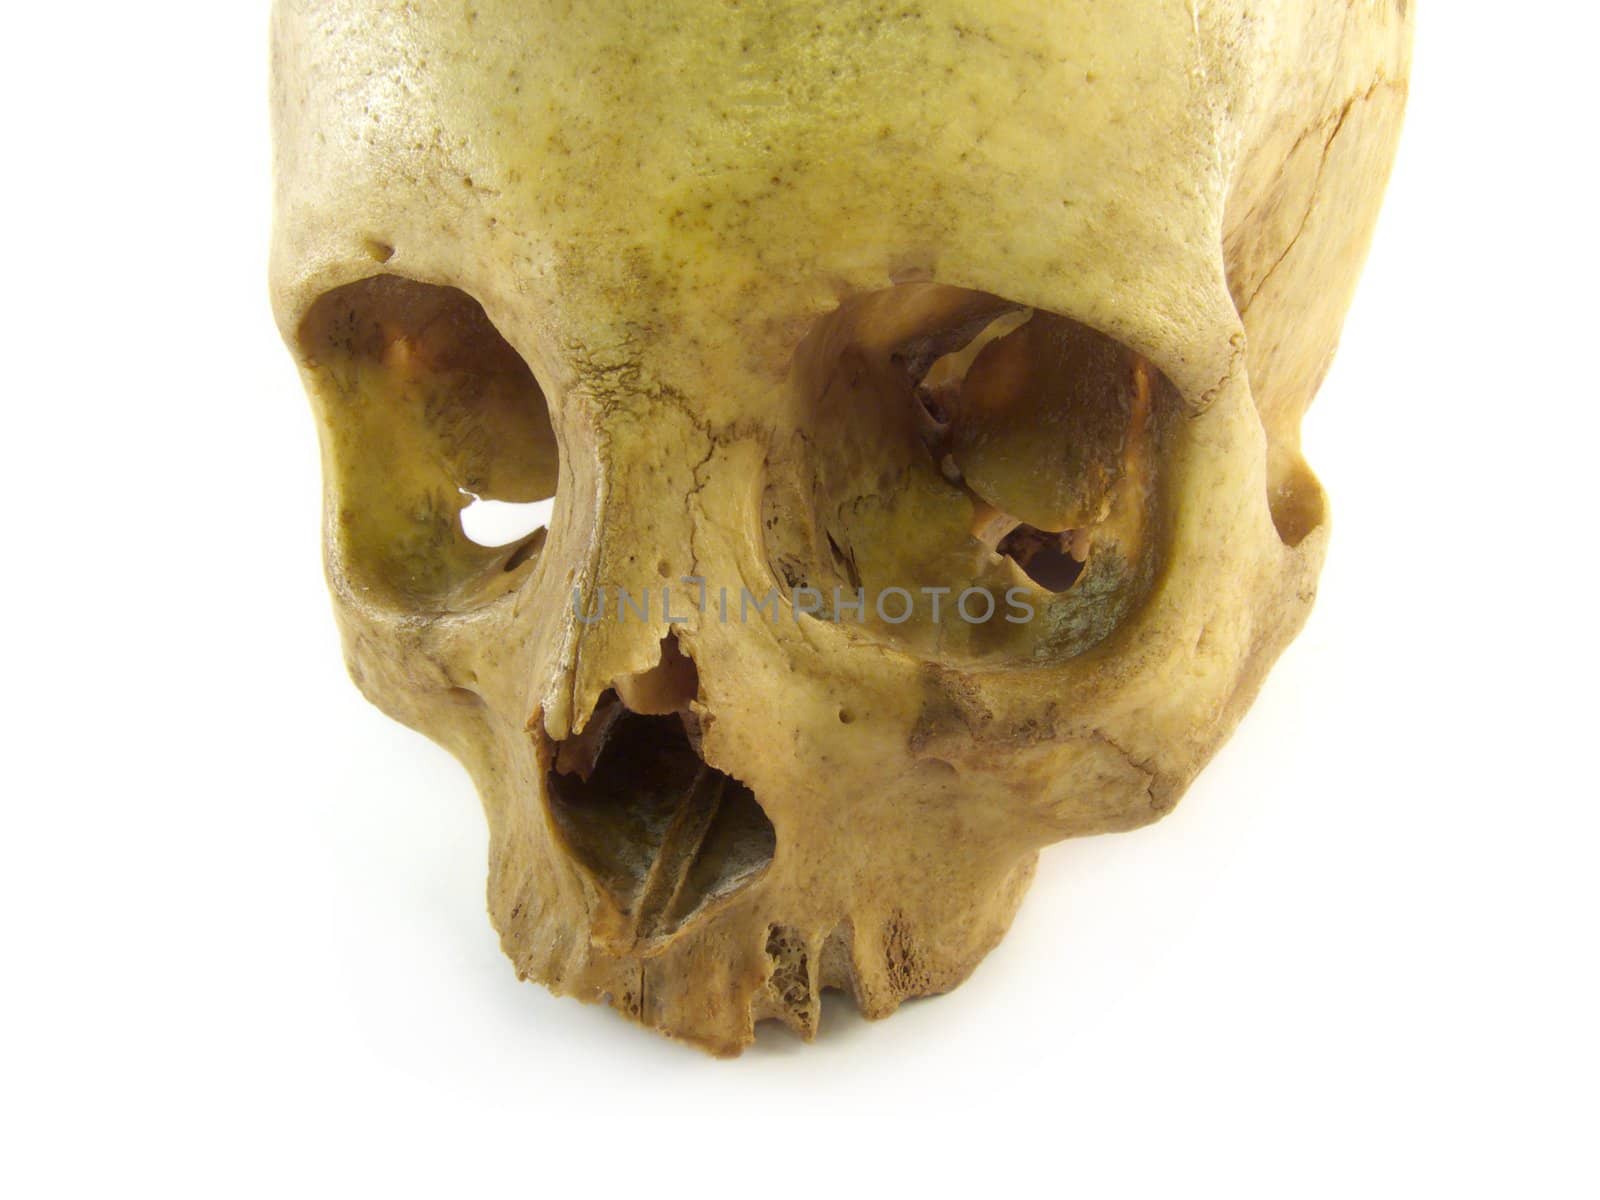 a close-up image of an isolated skull